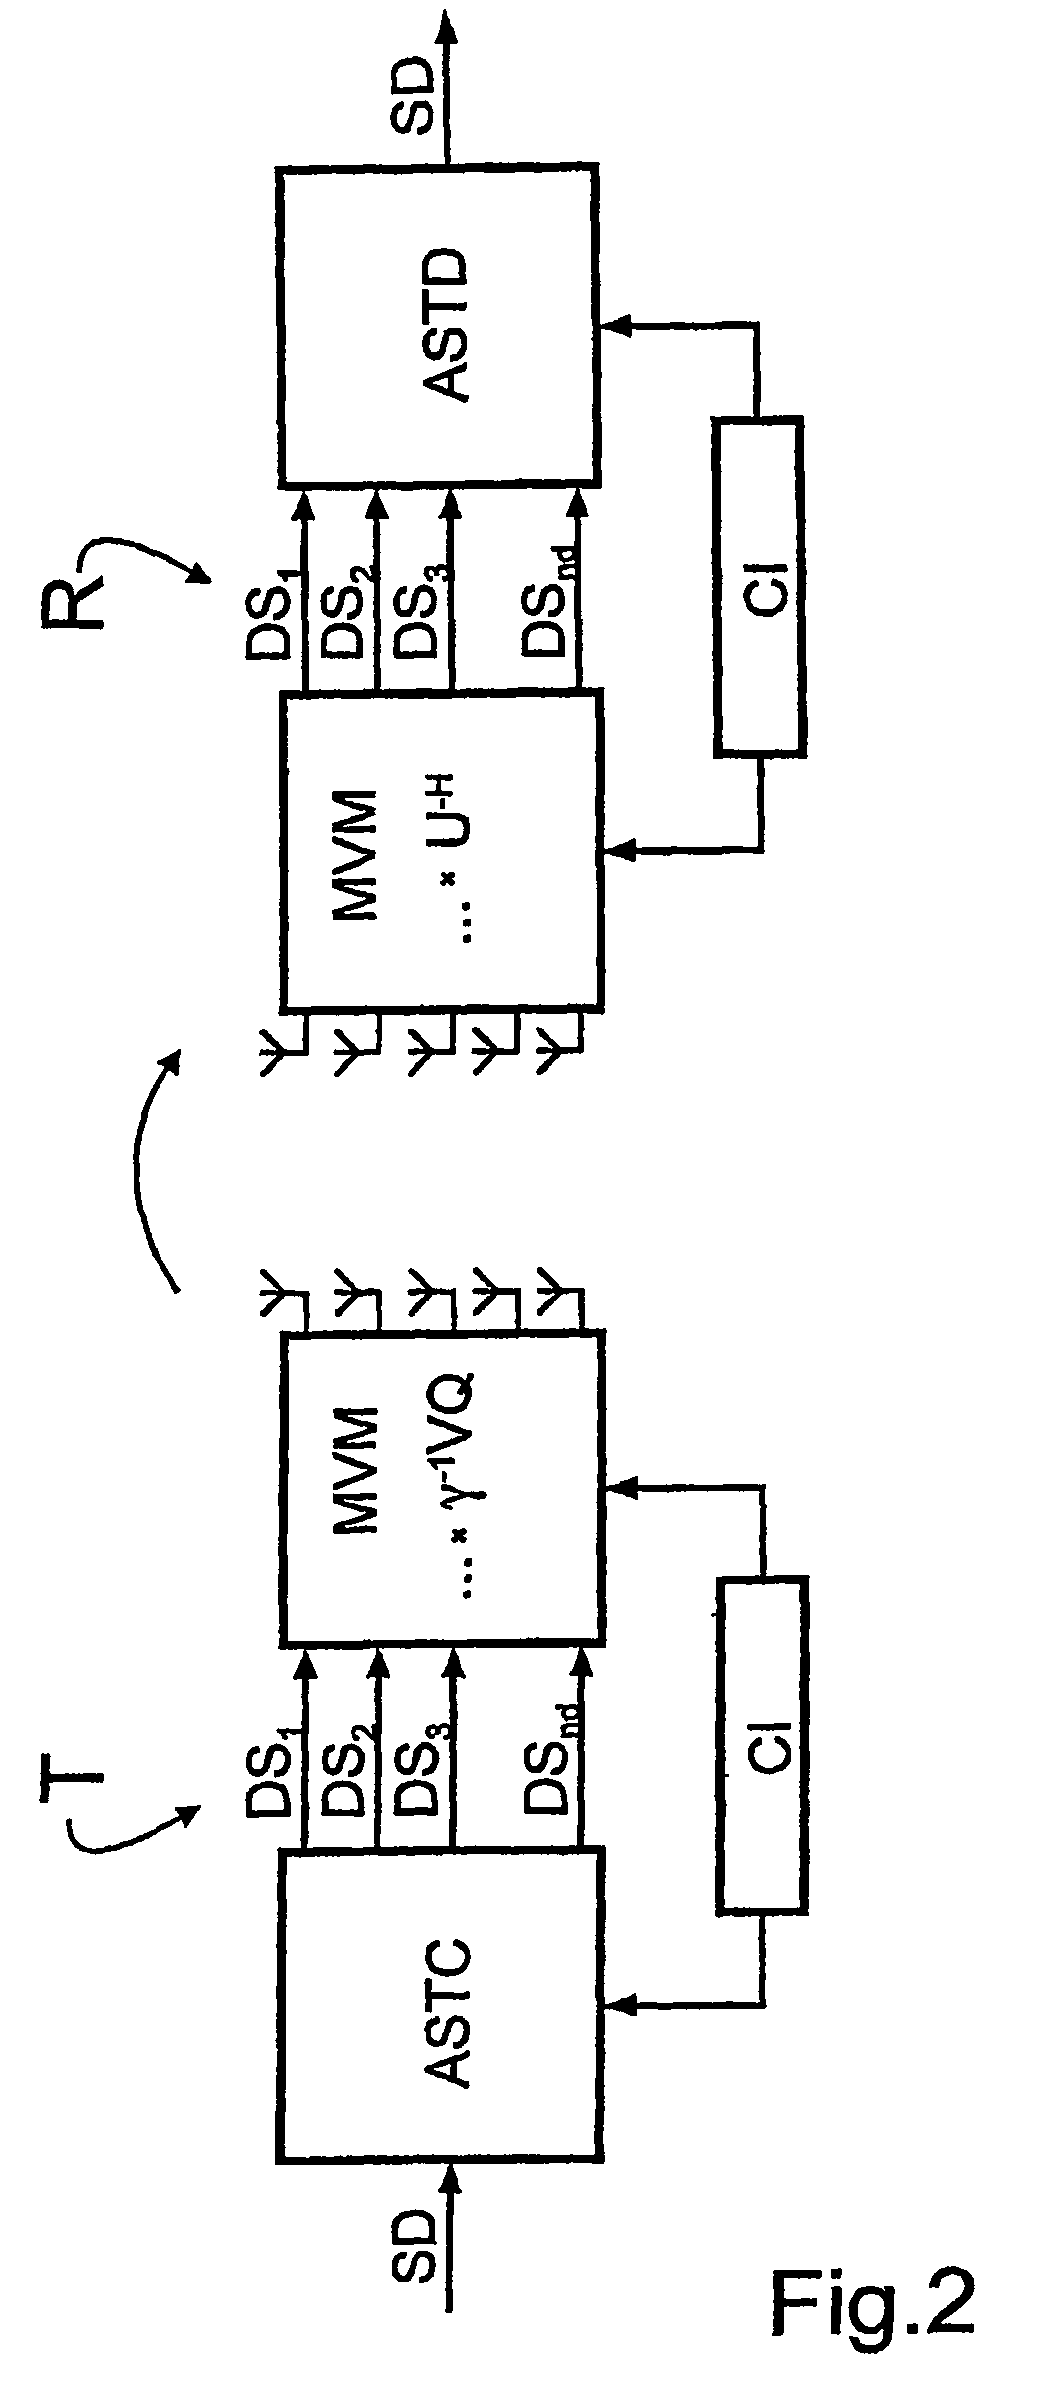 MIMO signal processing method involving a rank-adaptive matching of the transmission rate